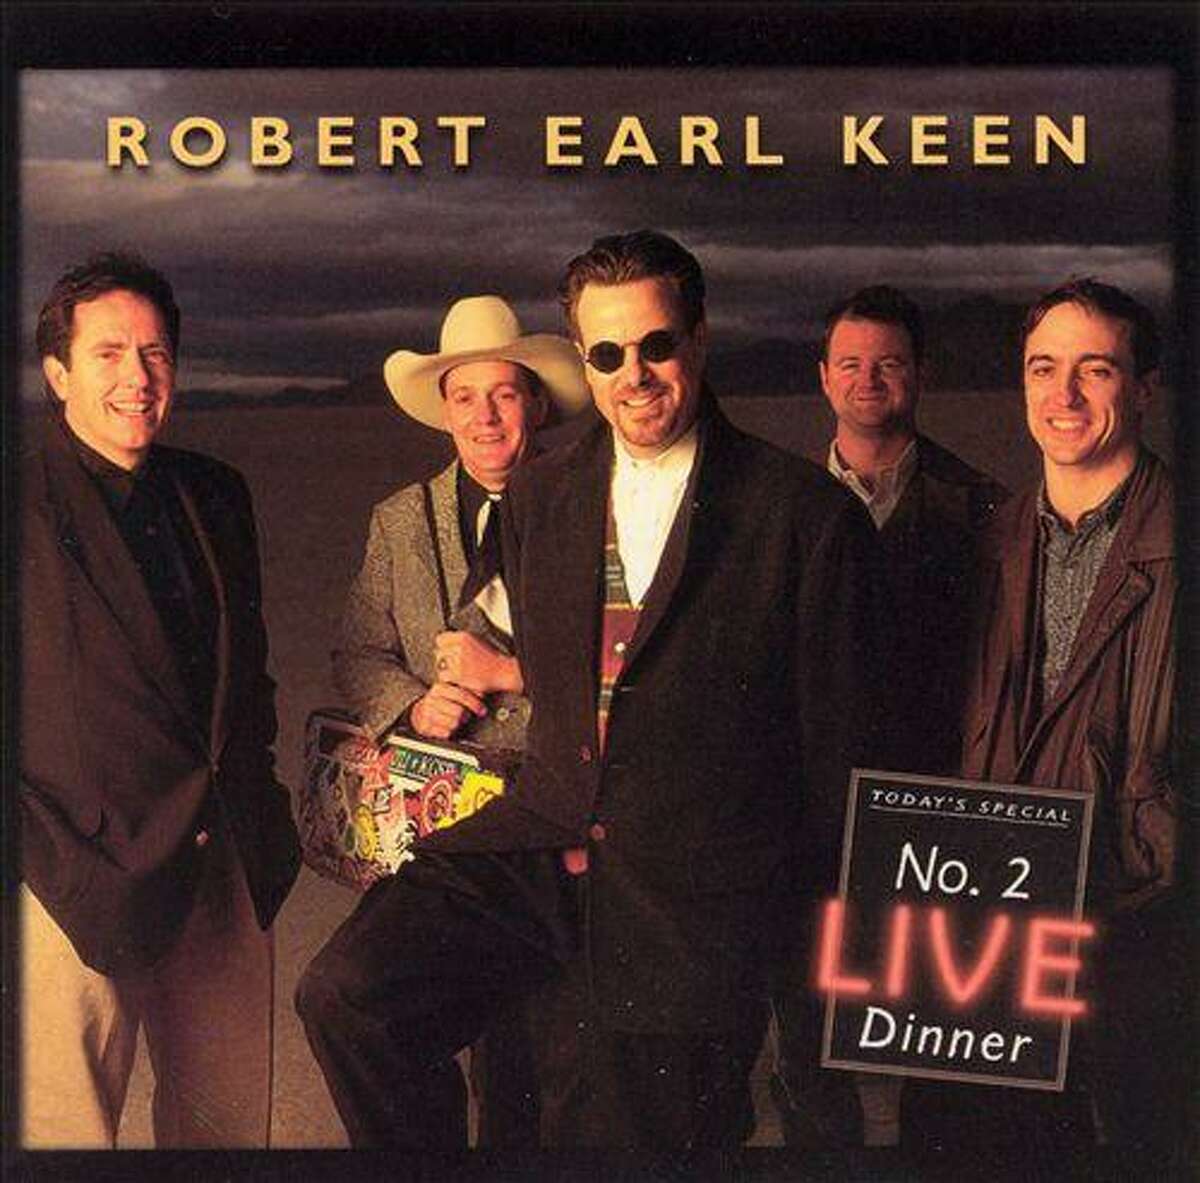 Cover of “No. 2 Live Dinner, the 1996 live album from Robert Earl Keen that was recorded in 1995 at John T. Floore Country Store. .